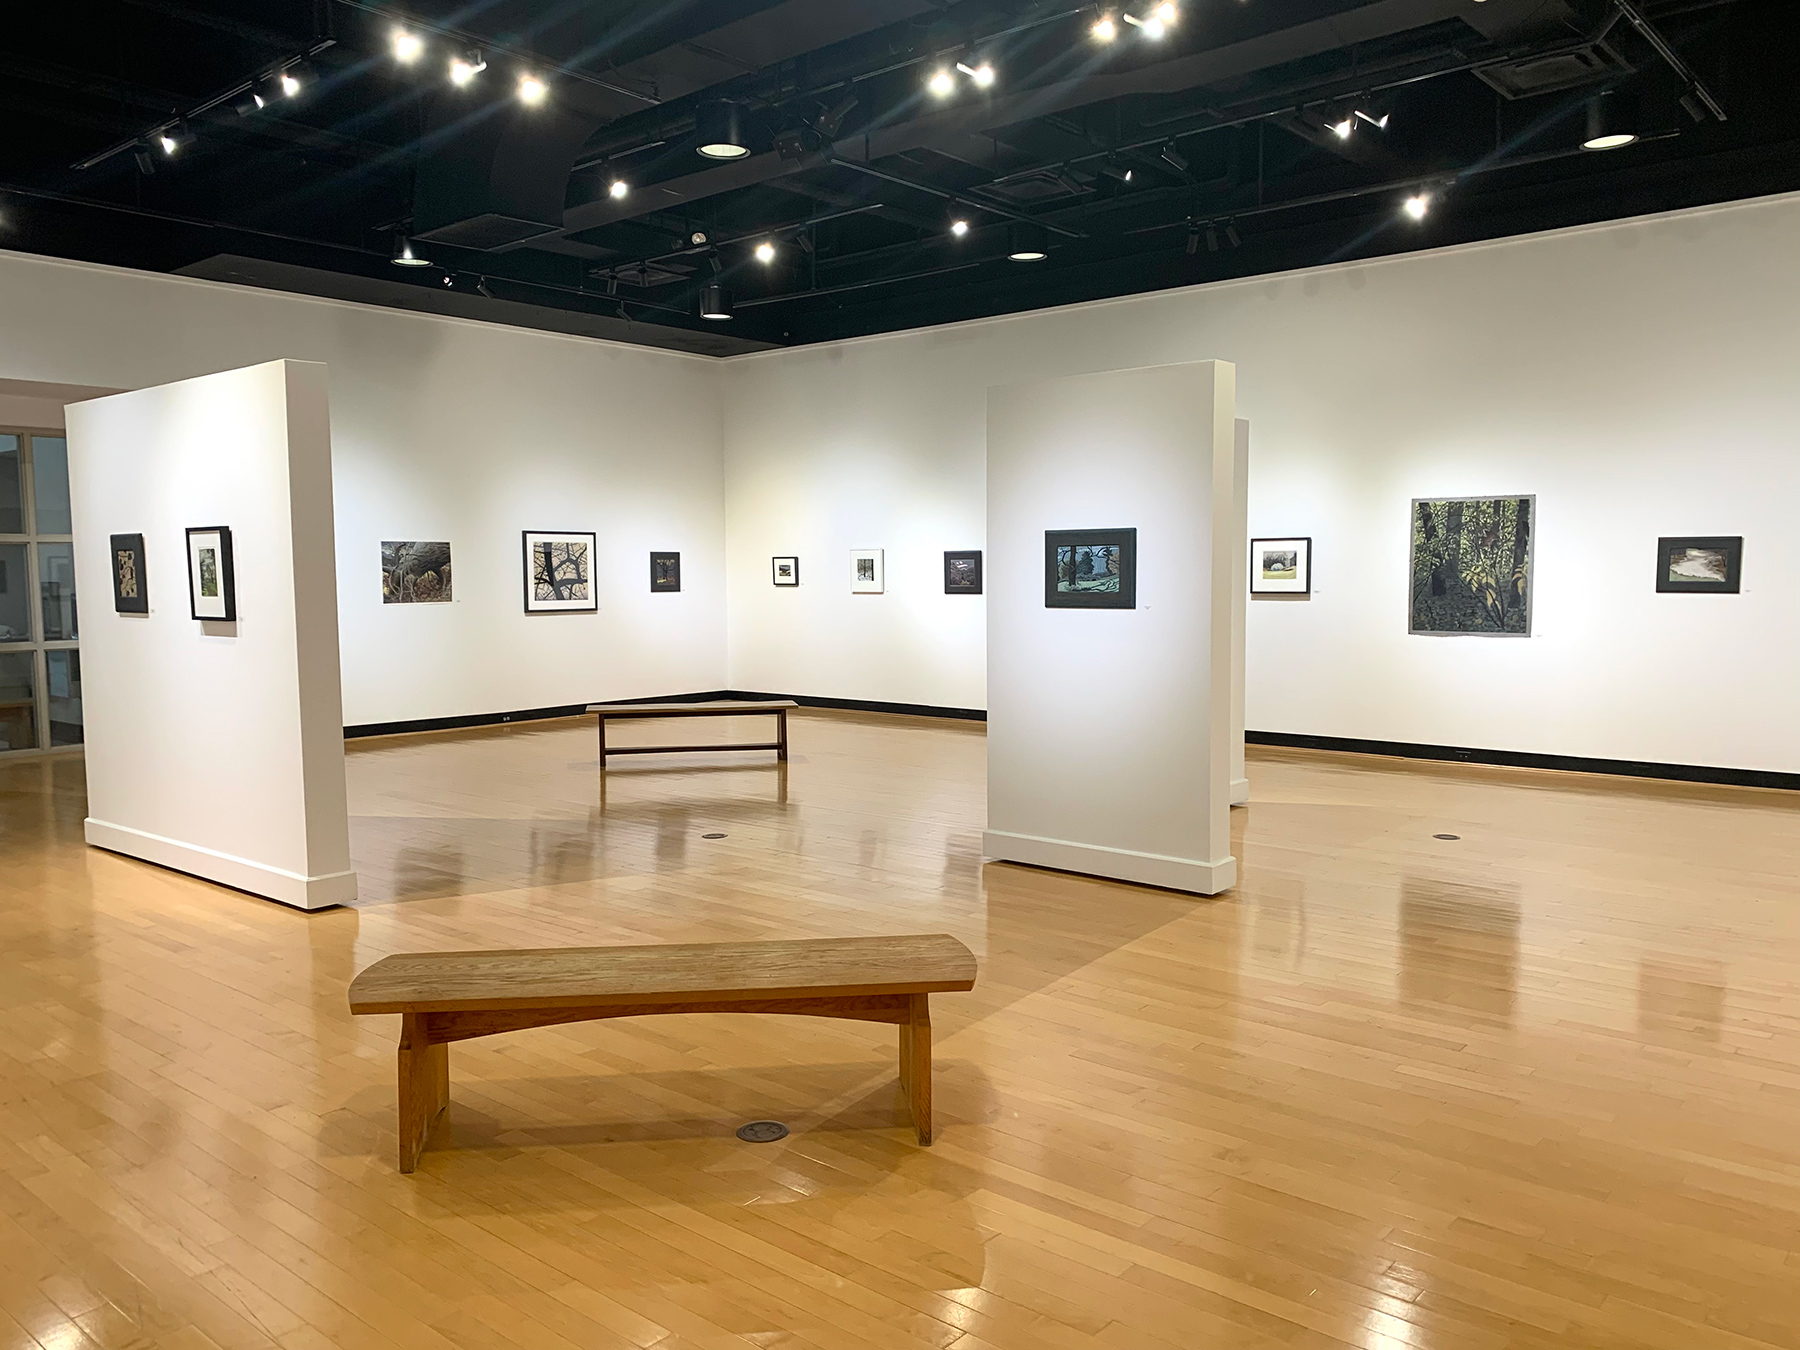 Gallery view of Nick Blosser exhibit at the Ortlip Gallery at Houghton University.